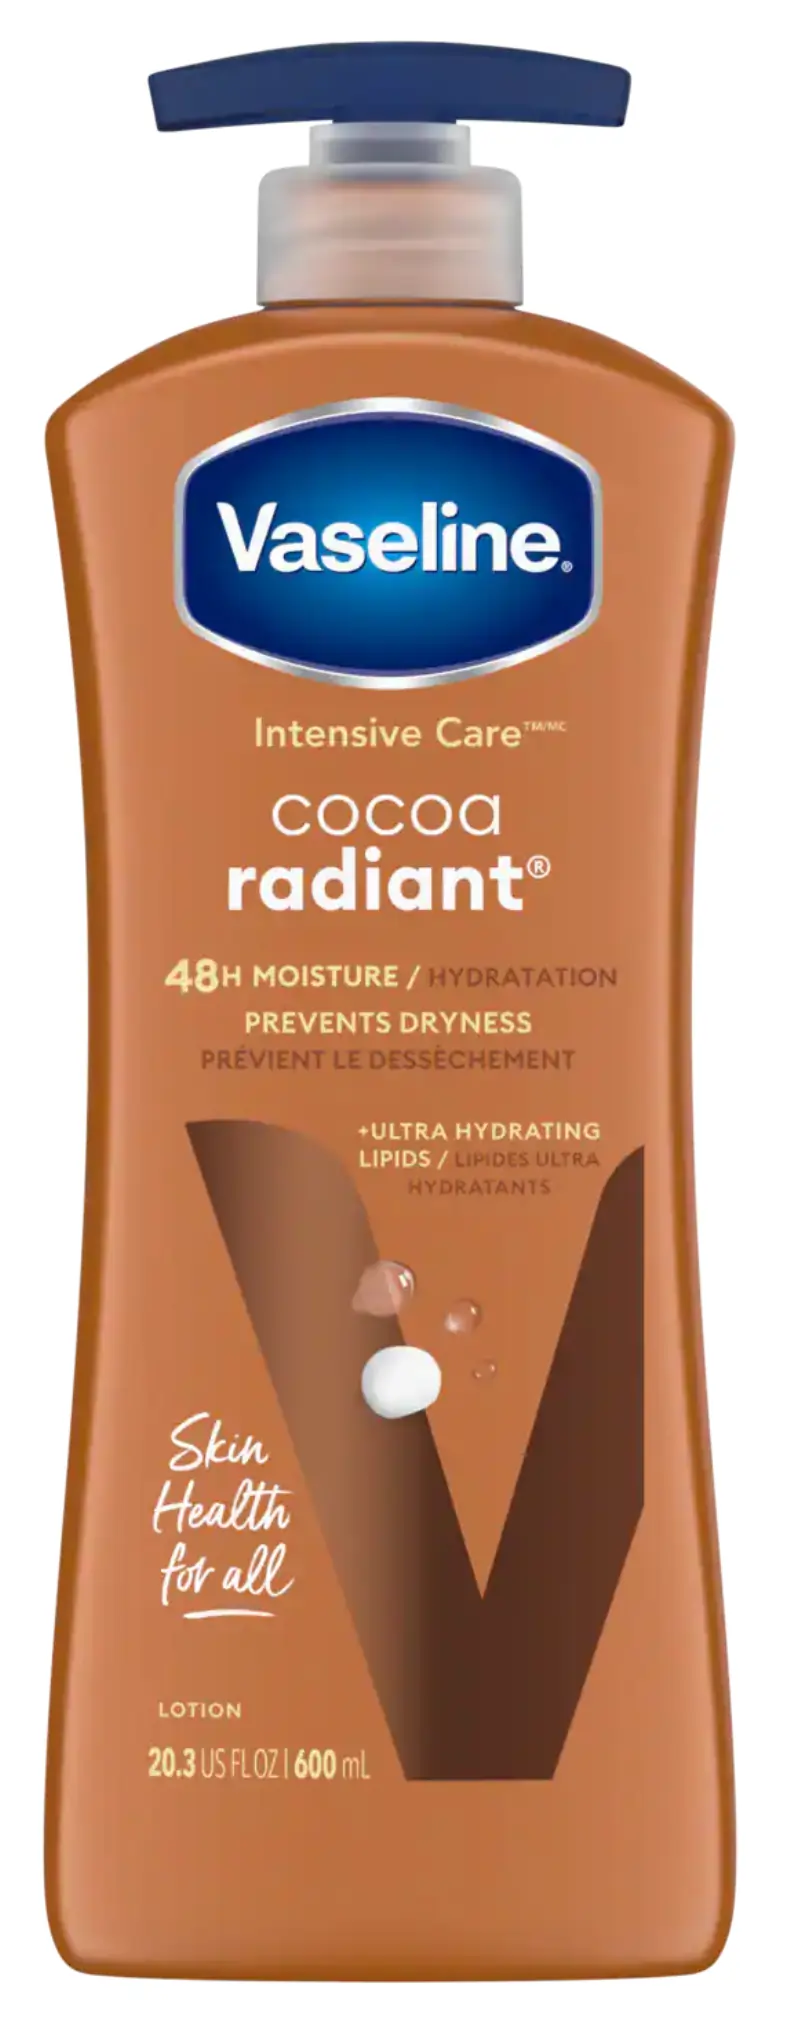 A tied FEMMENORDIC's choice in the Vaseline vs Jergens lotion comparison, the Vaseline Cocoa Radiant Lotion.